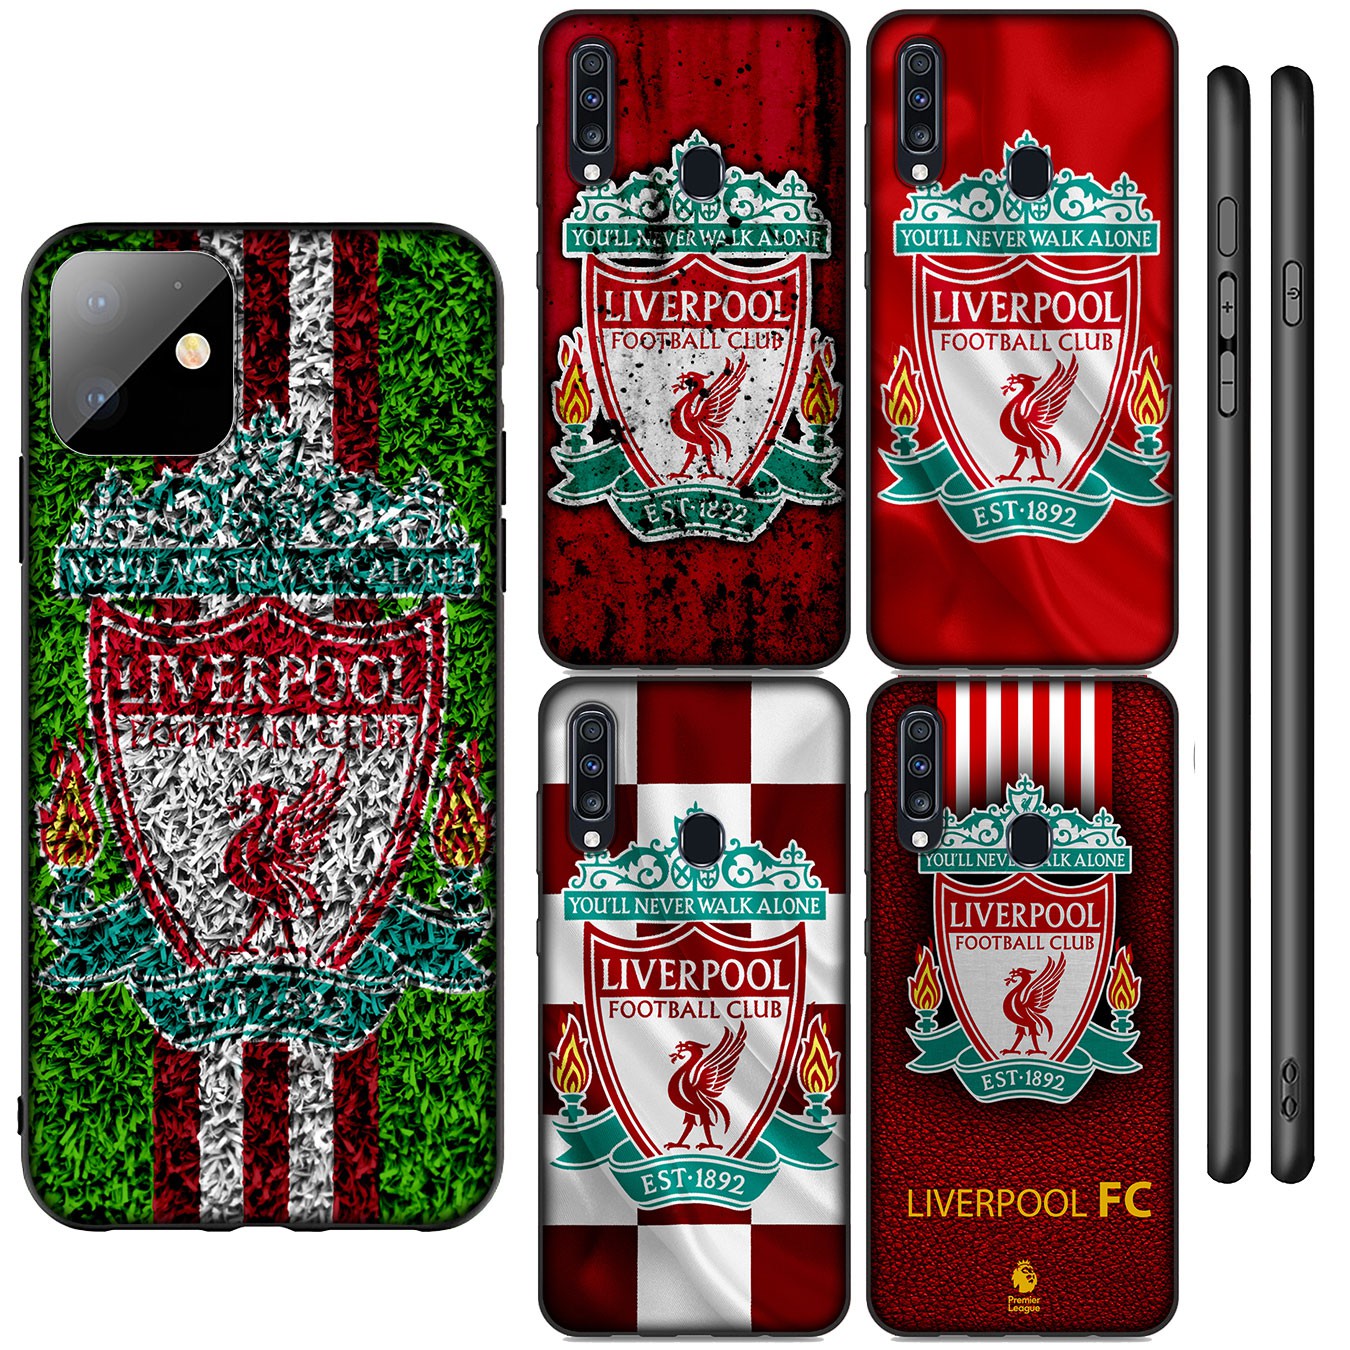 Samsung Galaxy S21 Ultra S8 Plus F62 M62 A2 A32 A52 A72 S21+ S8+ S21Plus Casing Soft Silicone Football logo Liverpool cool Phone Case